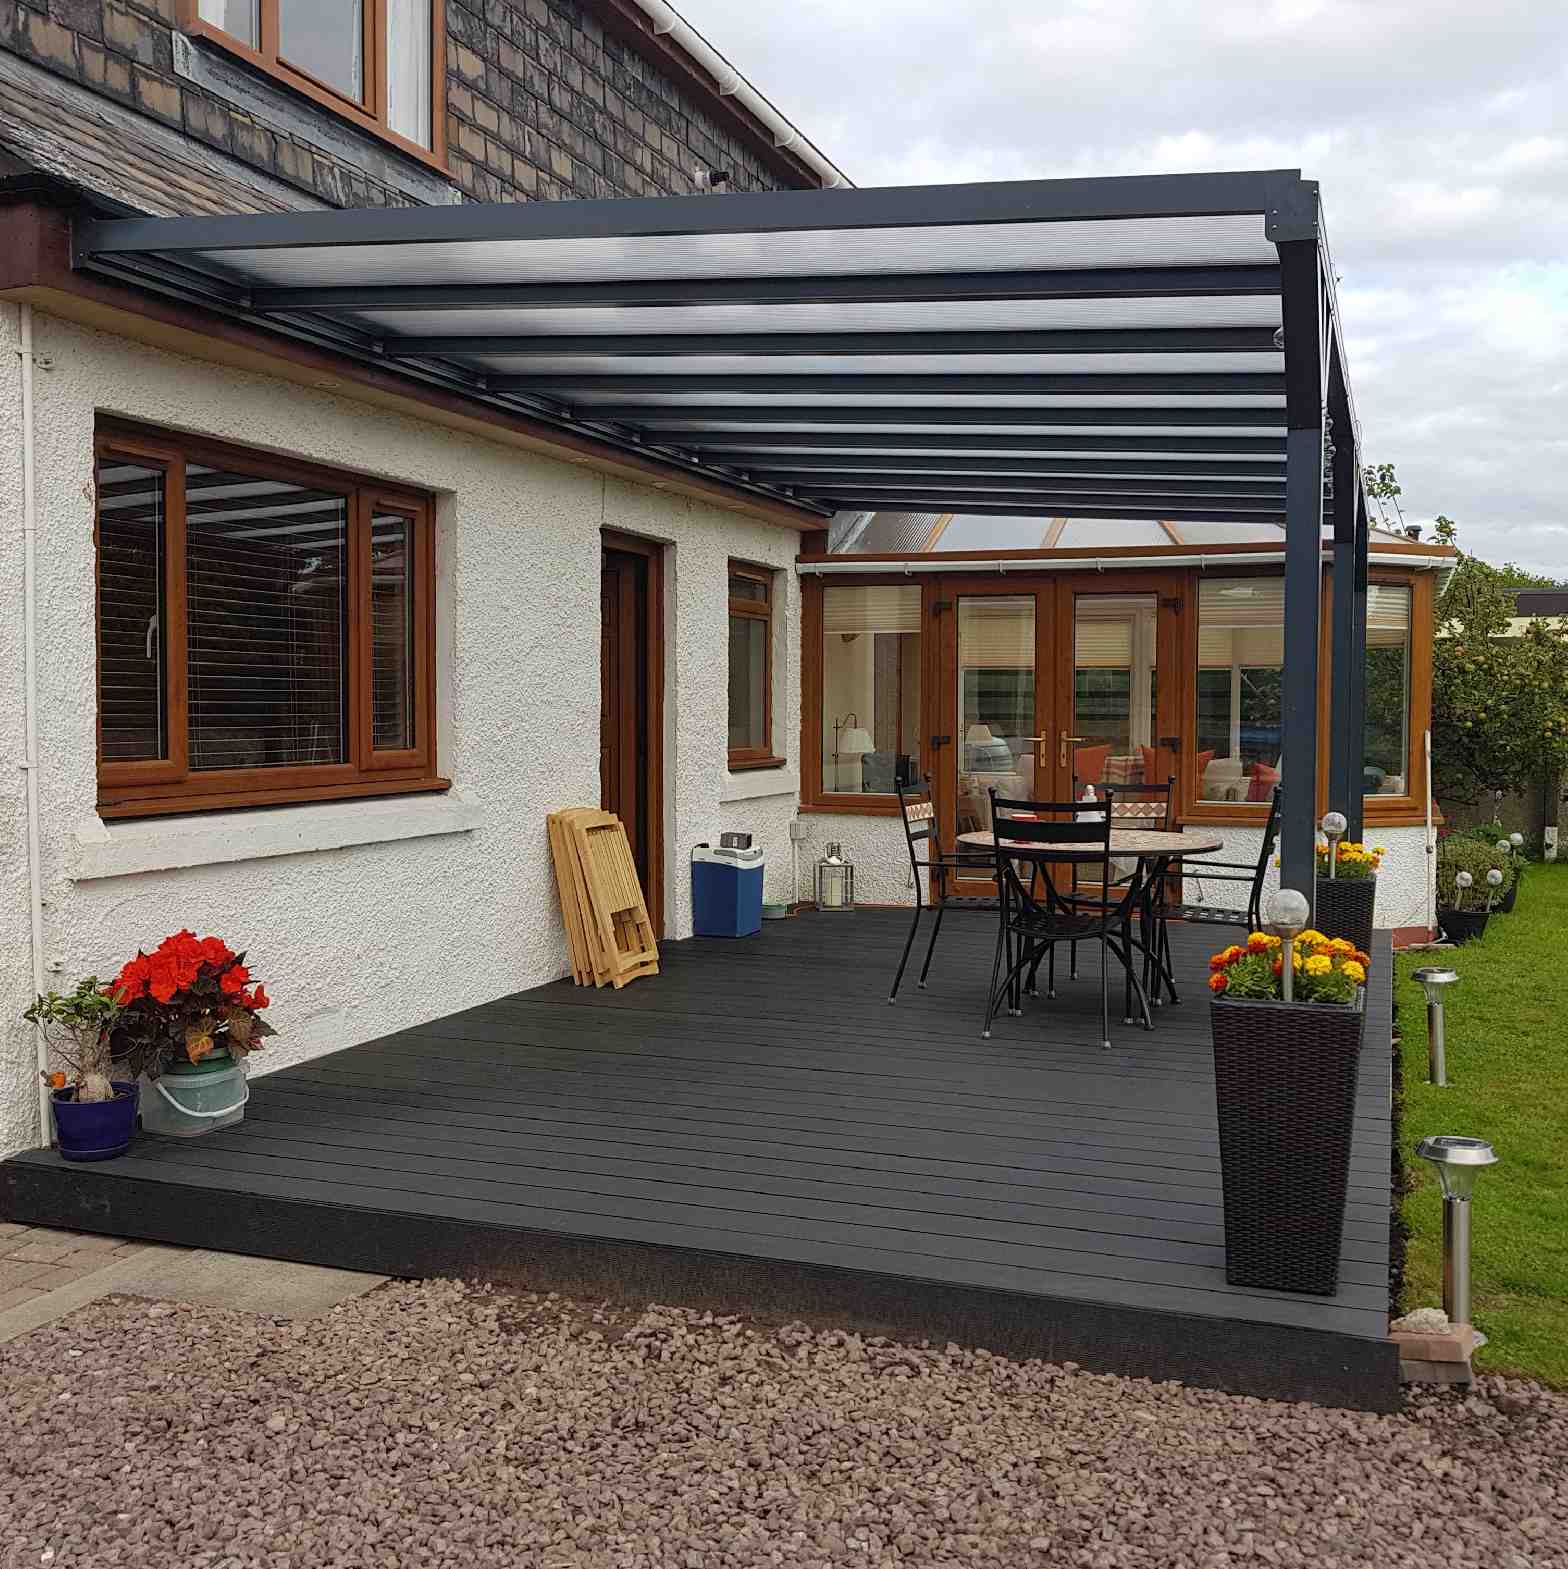 Buy Omega Verandah, Anthracite Grey, 6mm Glass Clear Plate Polycarbonate Glazing - 10.5m (W) x 2.0m (P), (5) Supporting Posts online today